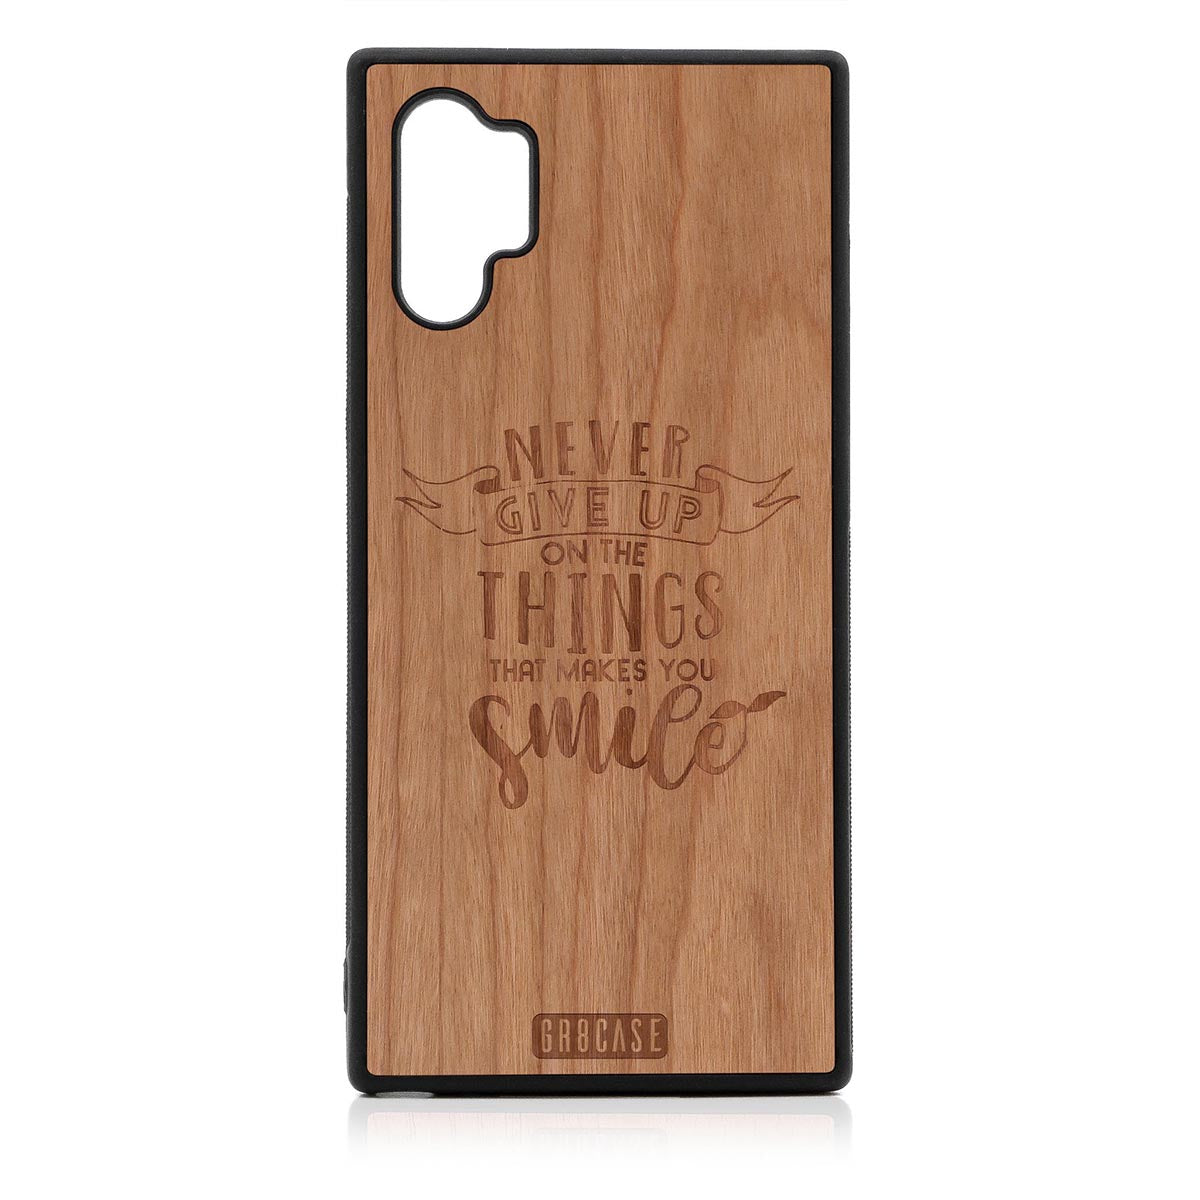 Never Give Up On The Things That Makes You Smile Design Wood Case Samsung Galaxy Note 10 Plus by GR8CASE